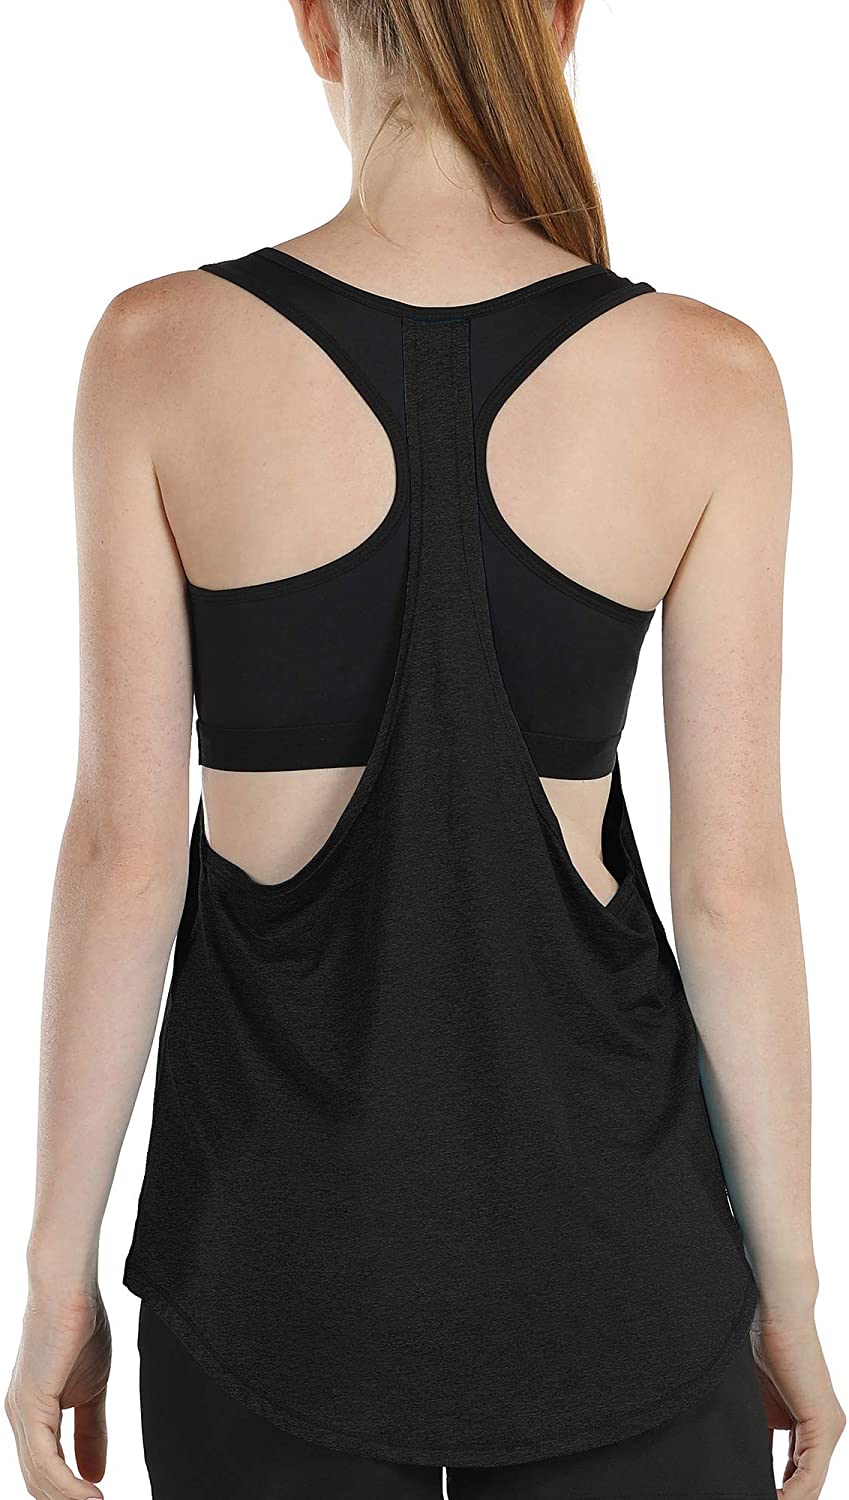 icyzone Workout Tank Tops for Women T-Back Running Tank Top Athletic Yoga Shirts